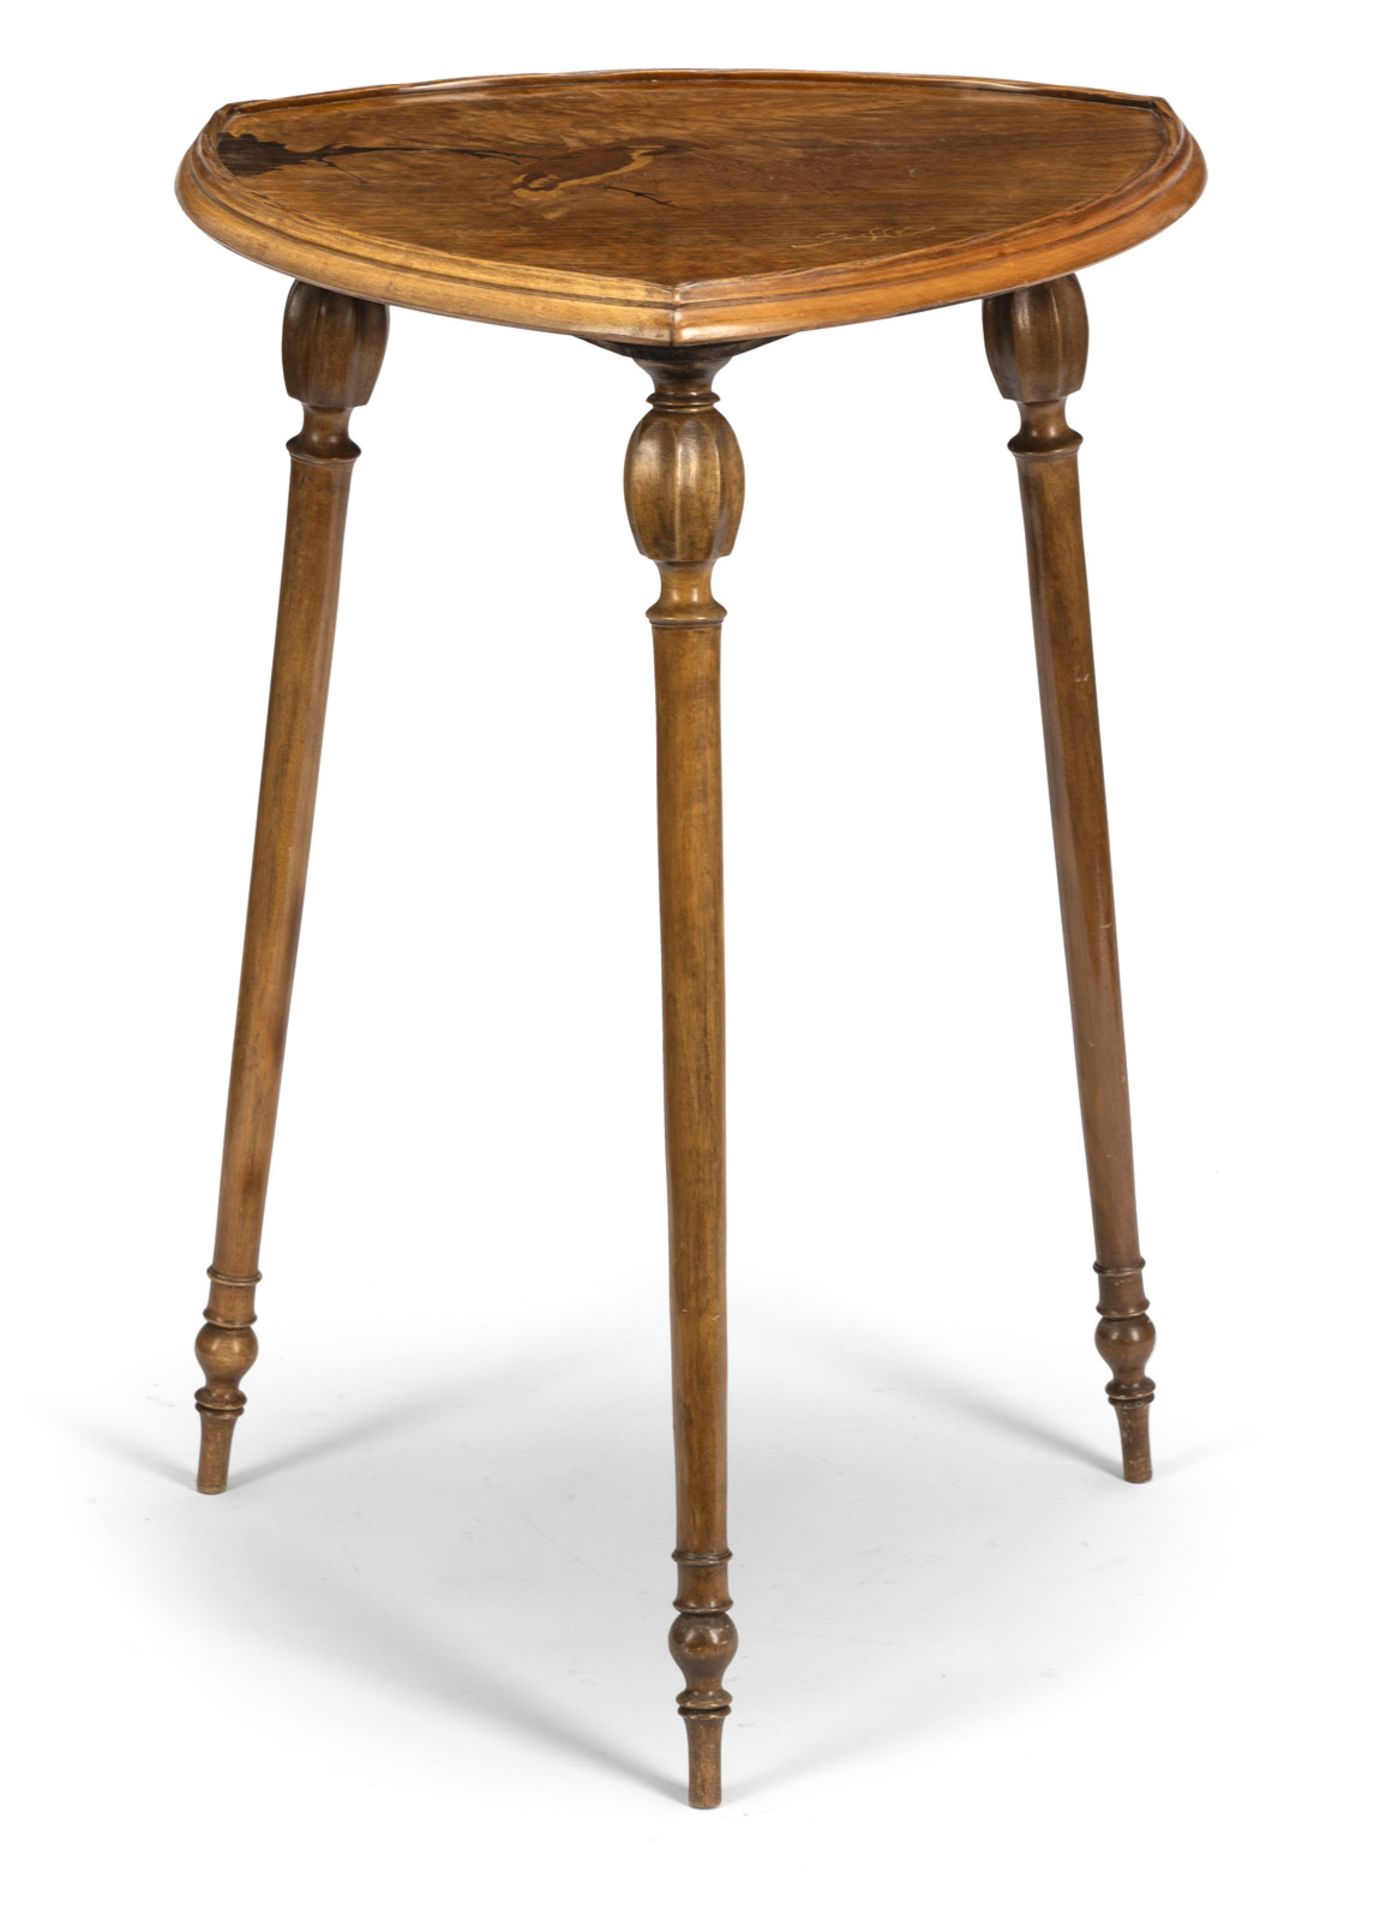 AN ART NOUVEAU WALNUT, MACASSAR AND MAHOGANY MARQUETRIED OCCASIONAL TABLE - Image 3 of 5